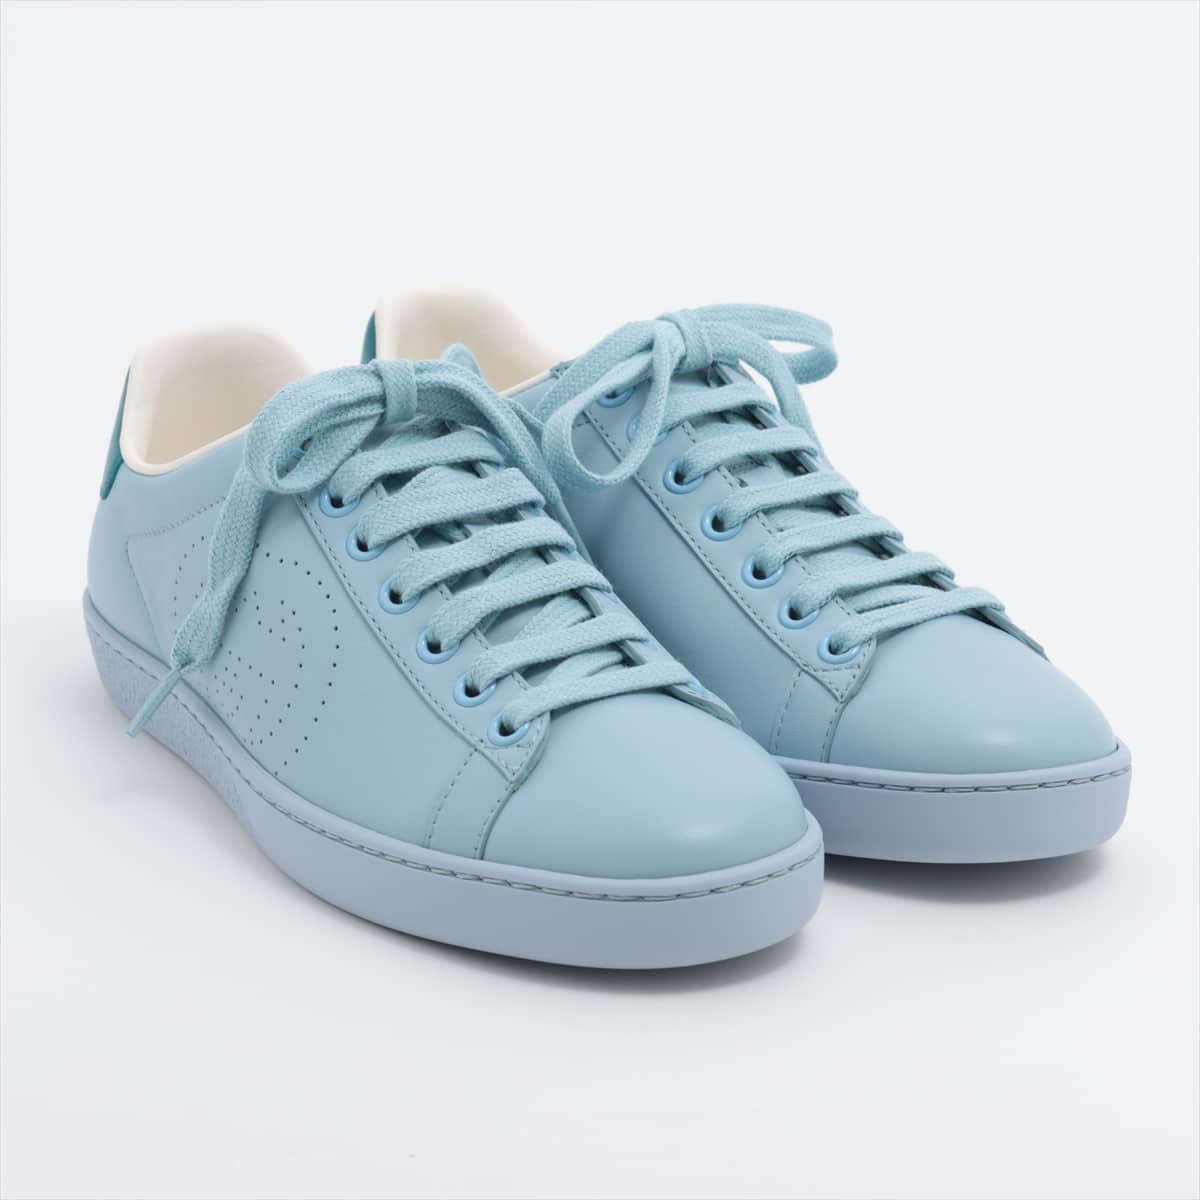 Gucci Interlocking G Leather Sneakers 35 Ladies' Blue 598527 There is a box